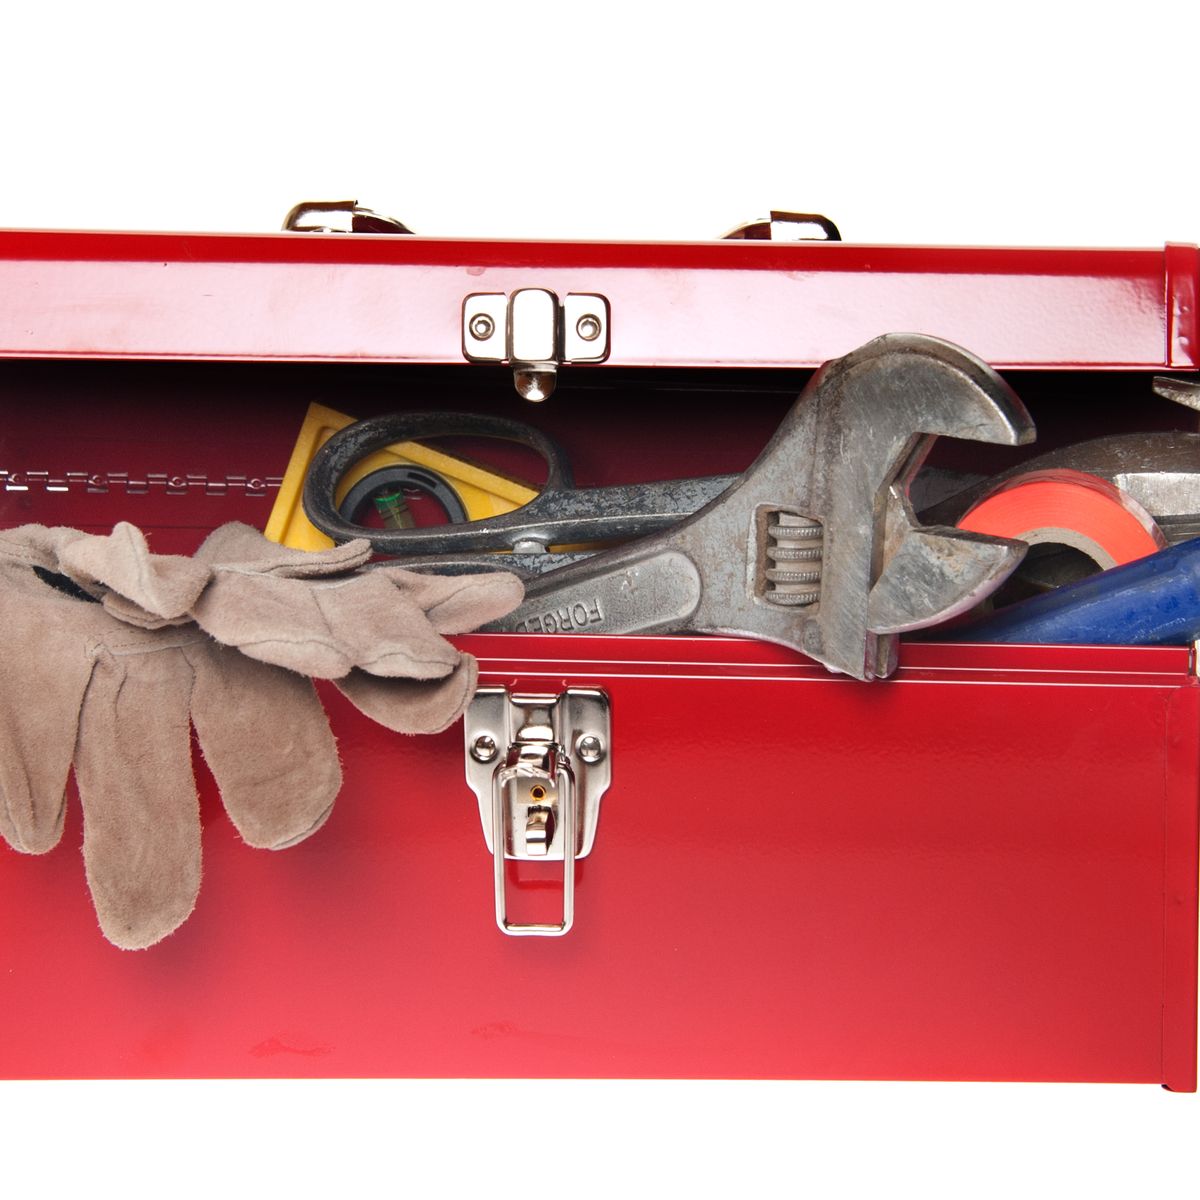 Essential Truck Tools Every Pickup Truck Driver Should Have